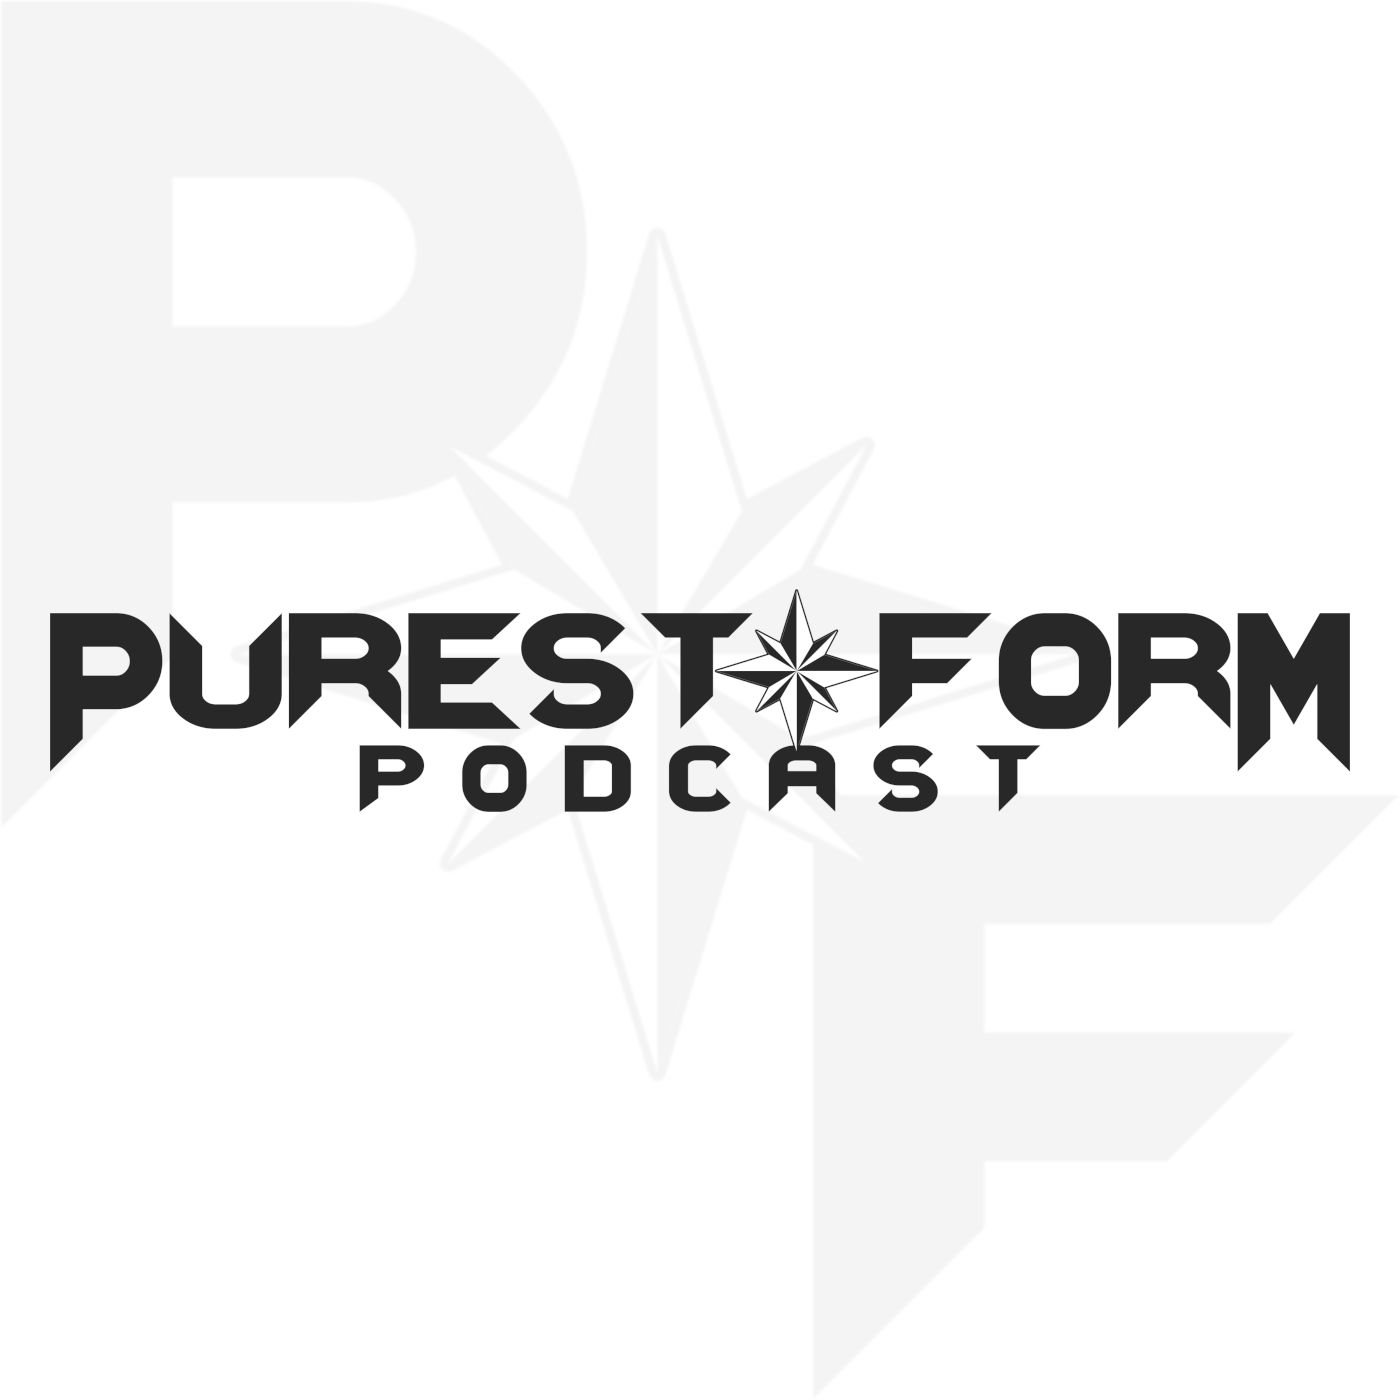 Purest Form Podcast - The Art of Music & Film